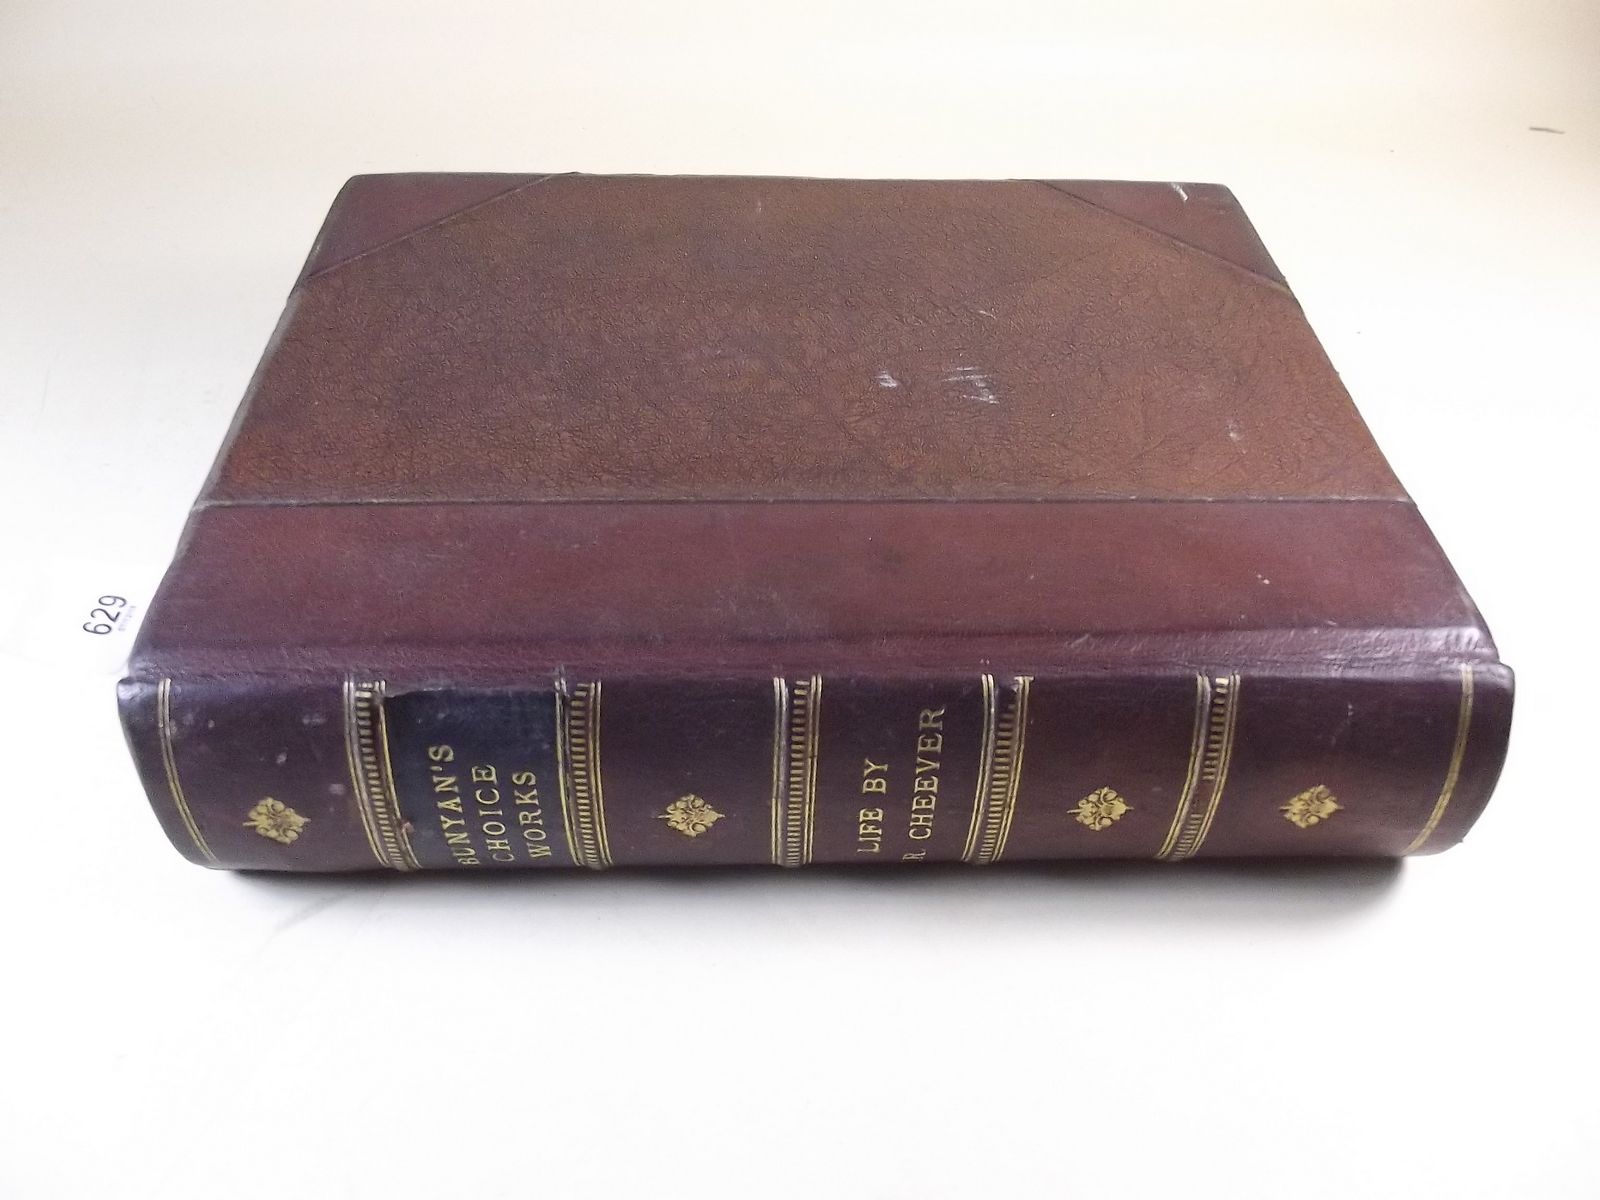 A copy of Bunyans Choice Works by Dr Cheever, leather bound - 1864